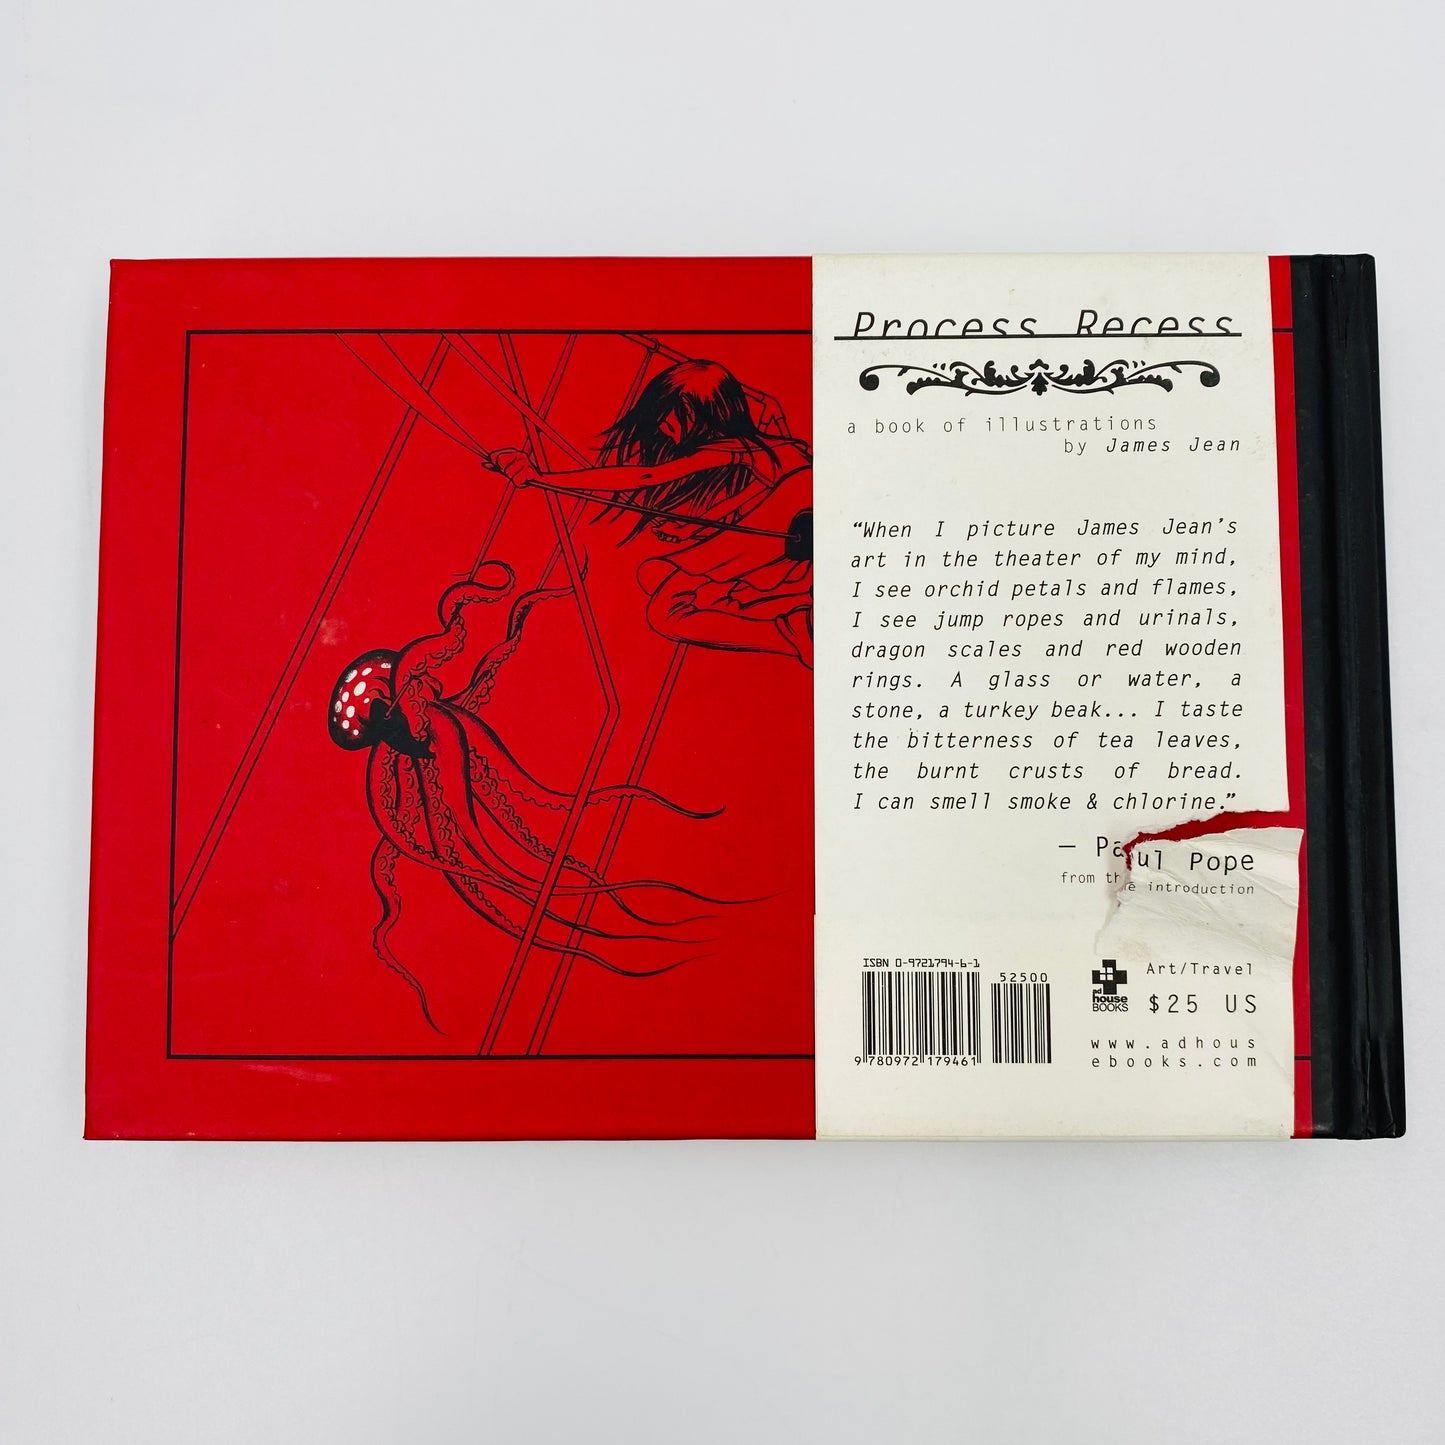 Process Recess James Jean: Selected Paintings Sketchbooks & Illustrations 1999-2004 first printing hardcover (2005) ad house Books